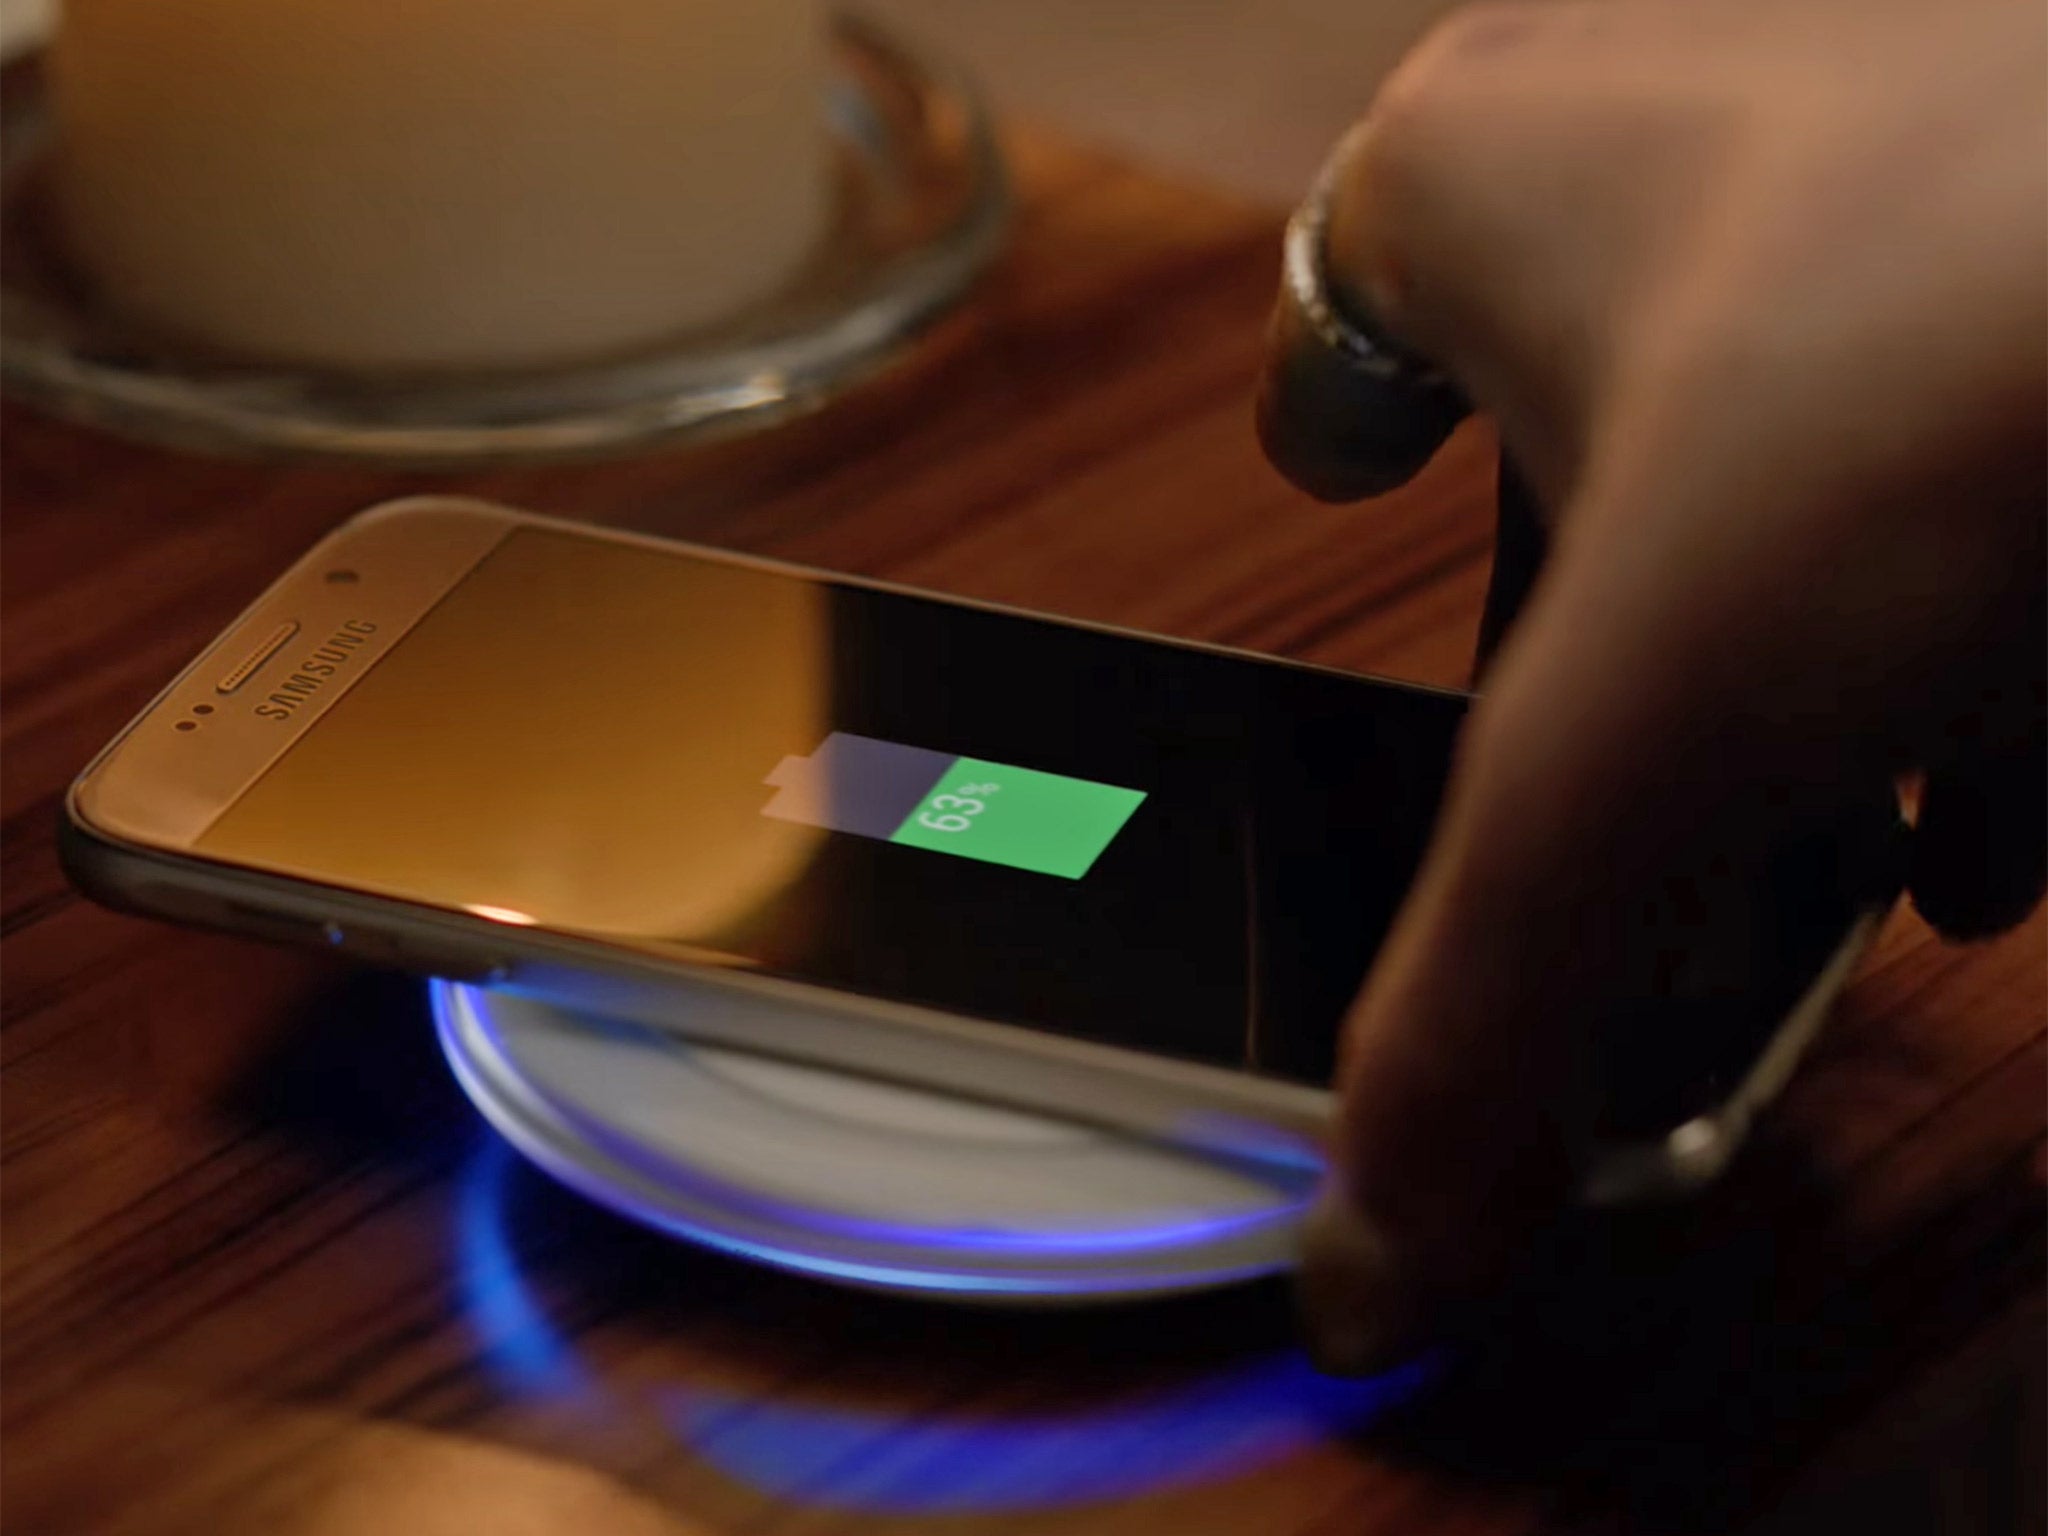 The Samsung Galaxy S6 offers wireless charging - but should we be impressed?